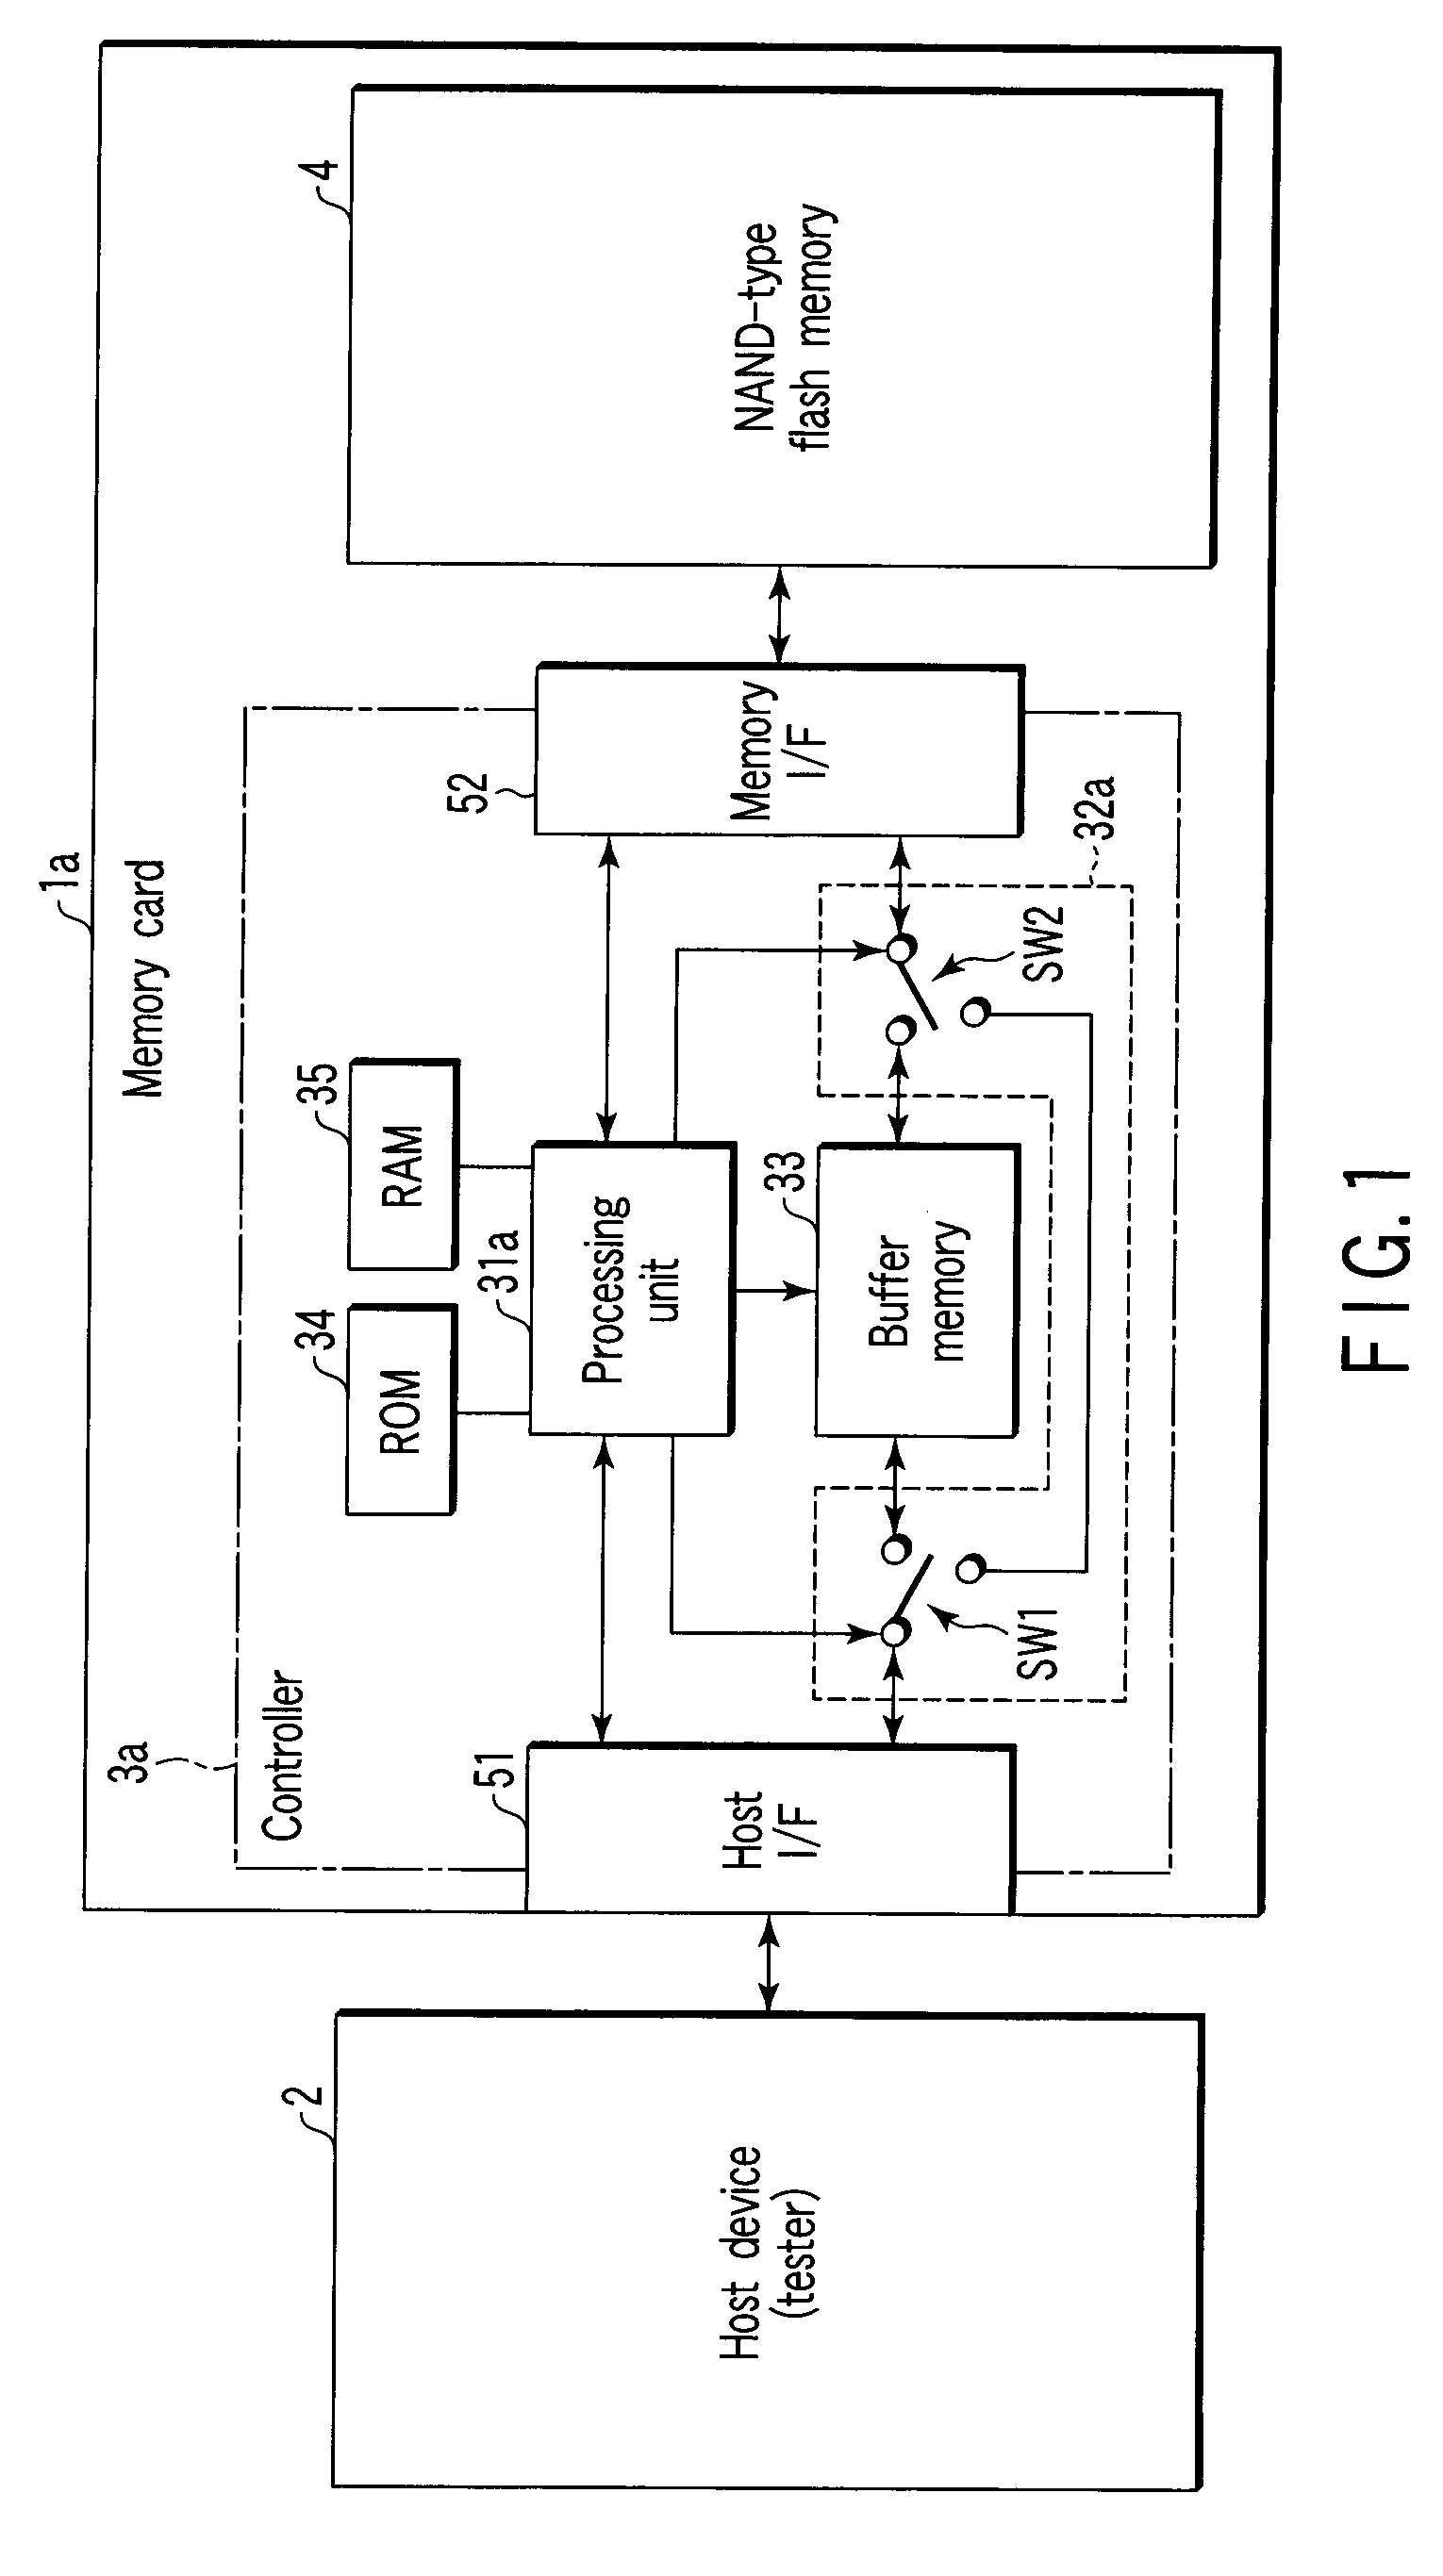 Memory system and controller